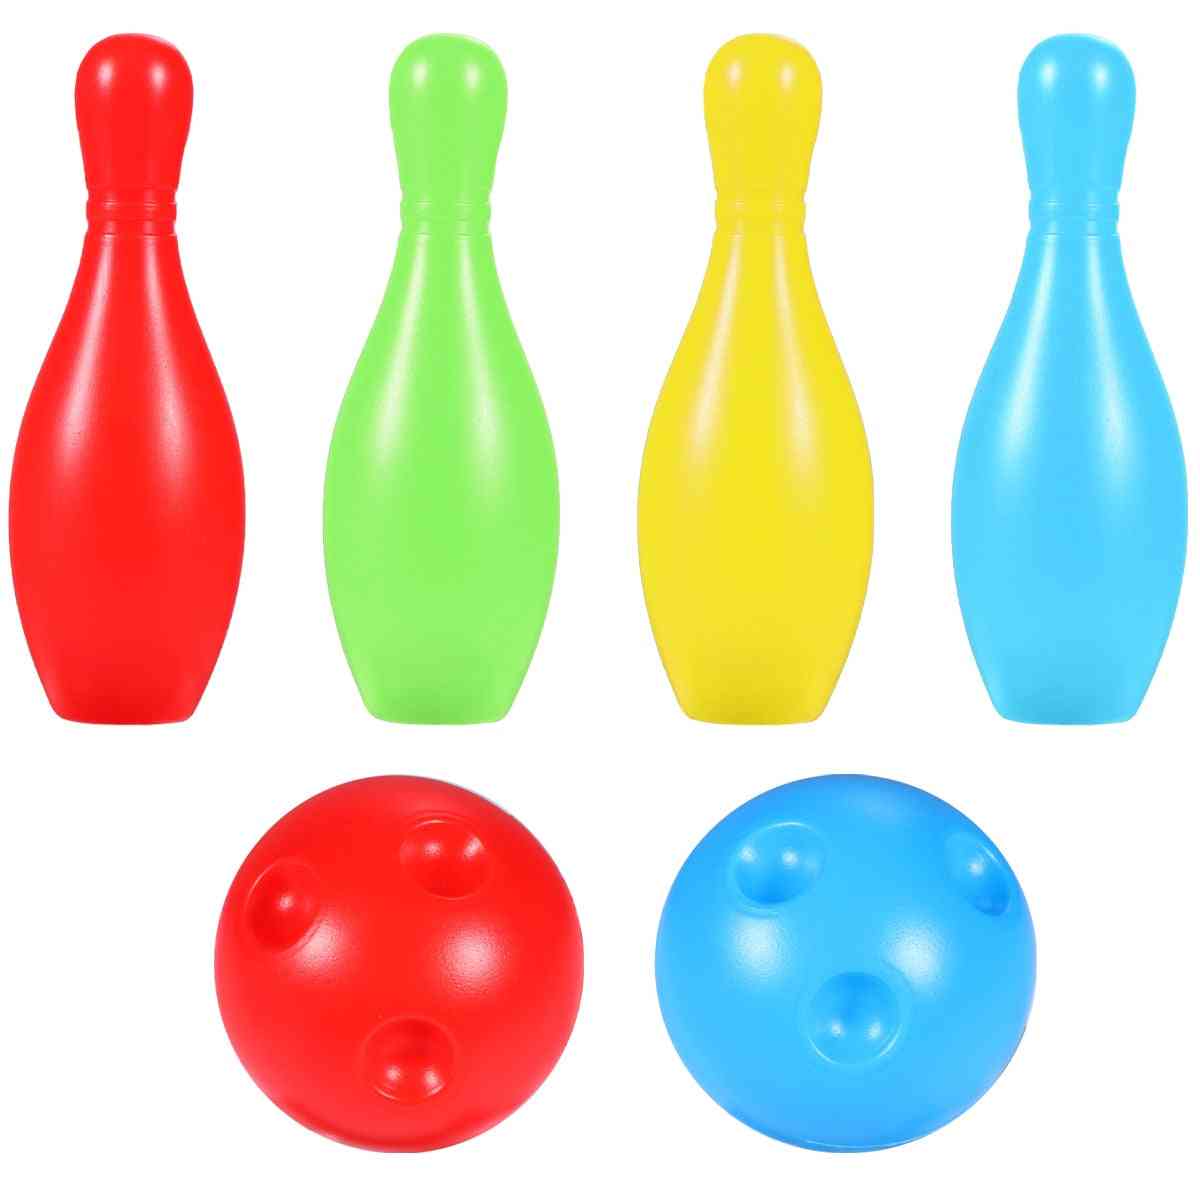 1 Set Bowling Pins And Balls Fun Colorful Skittle Game For/kids